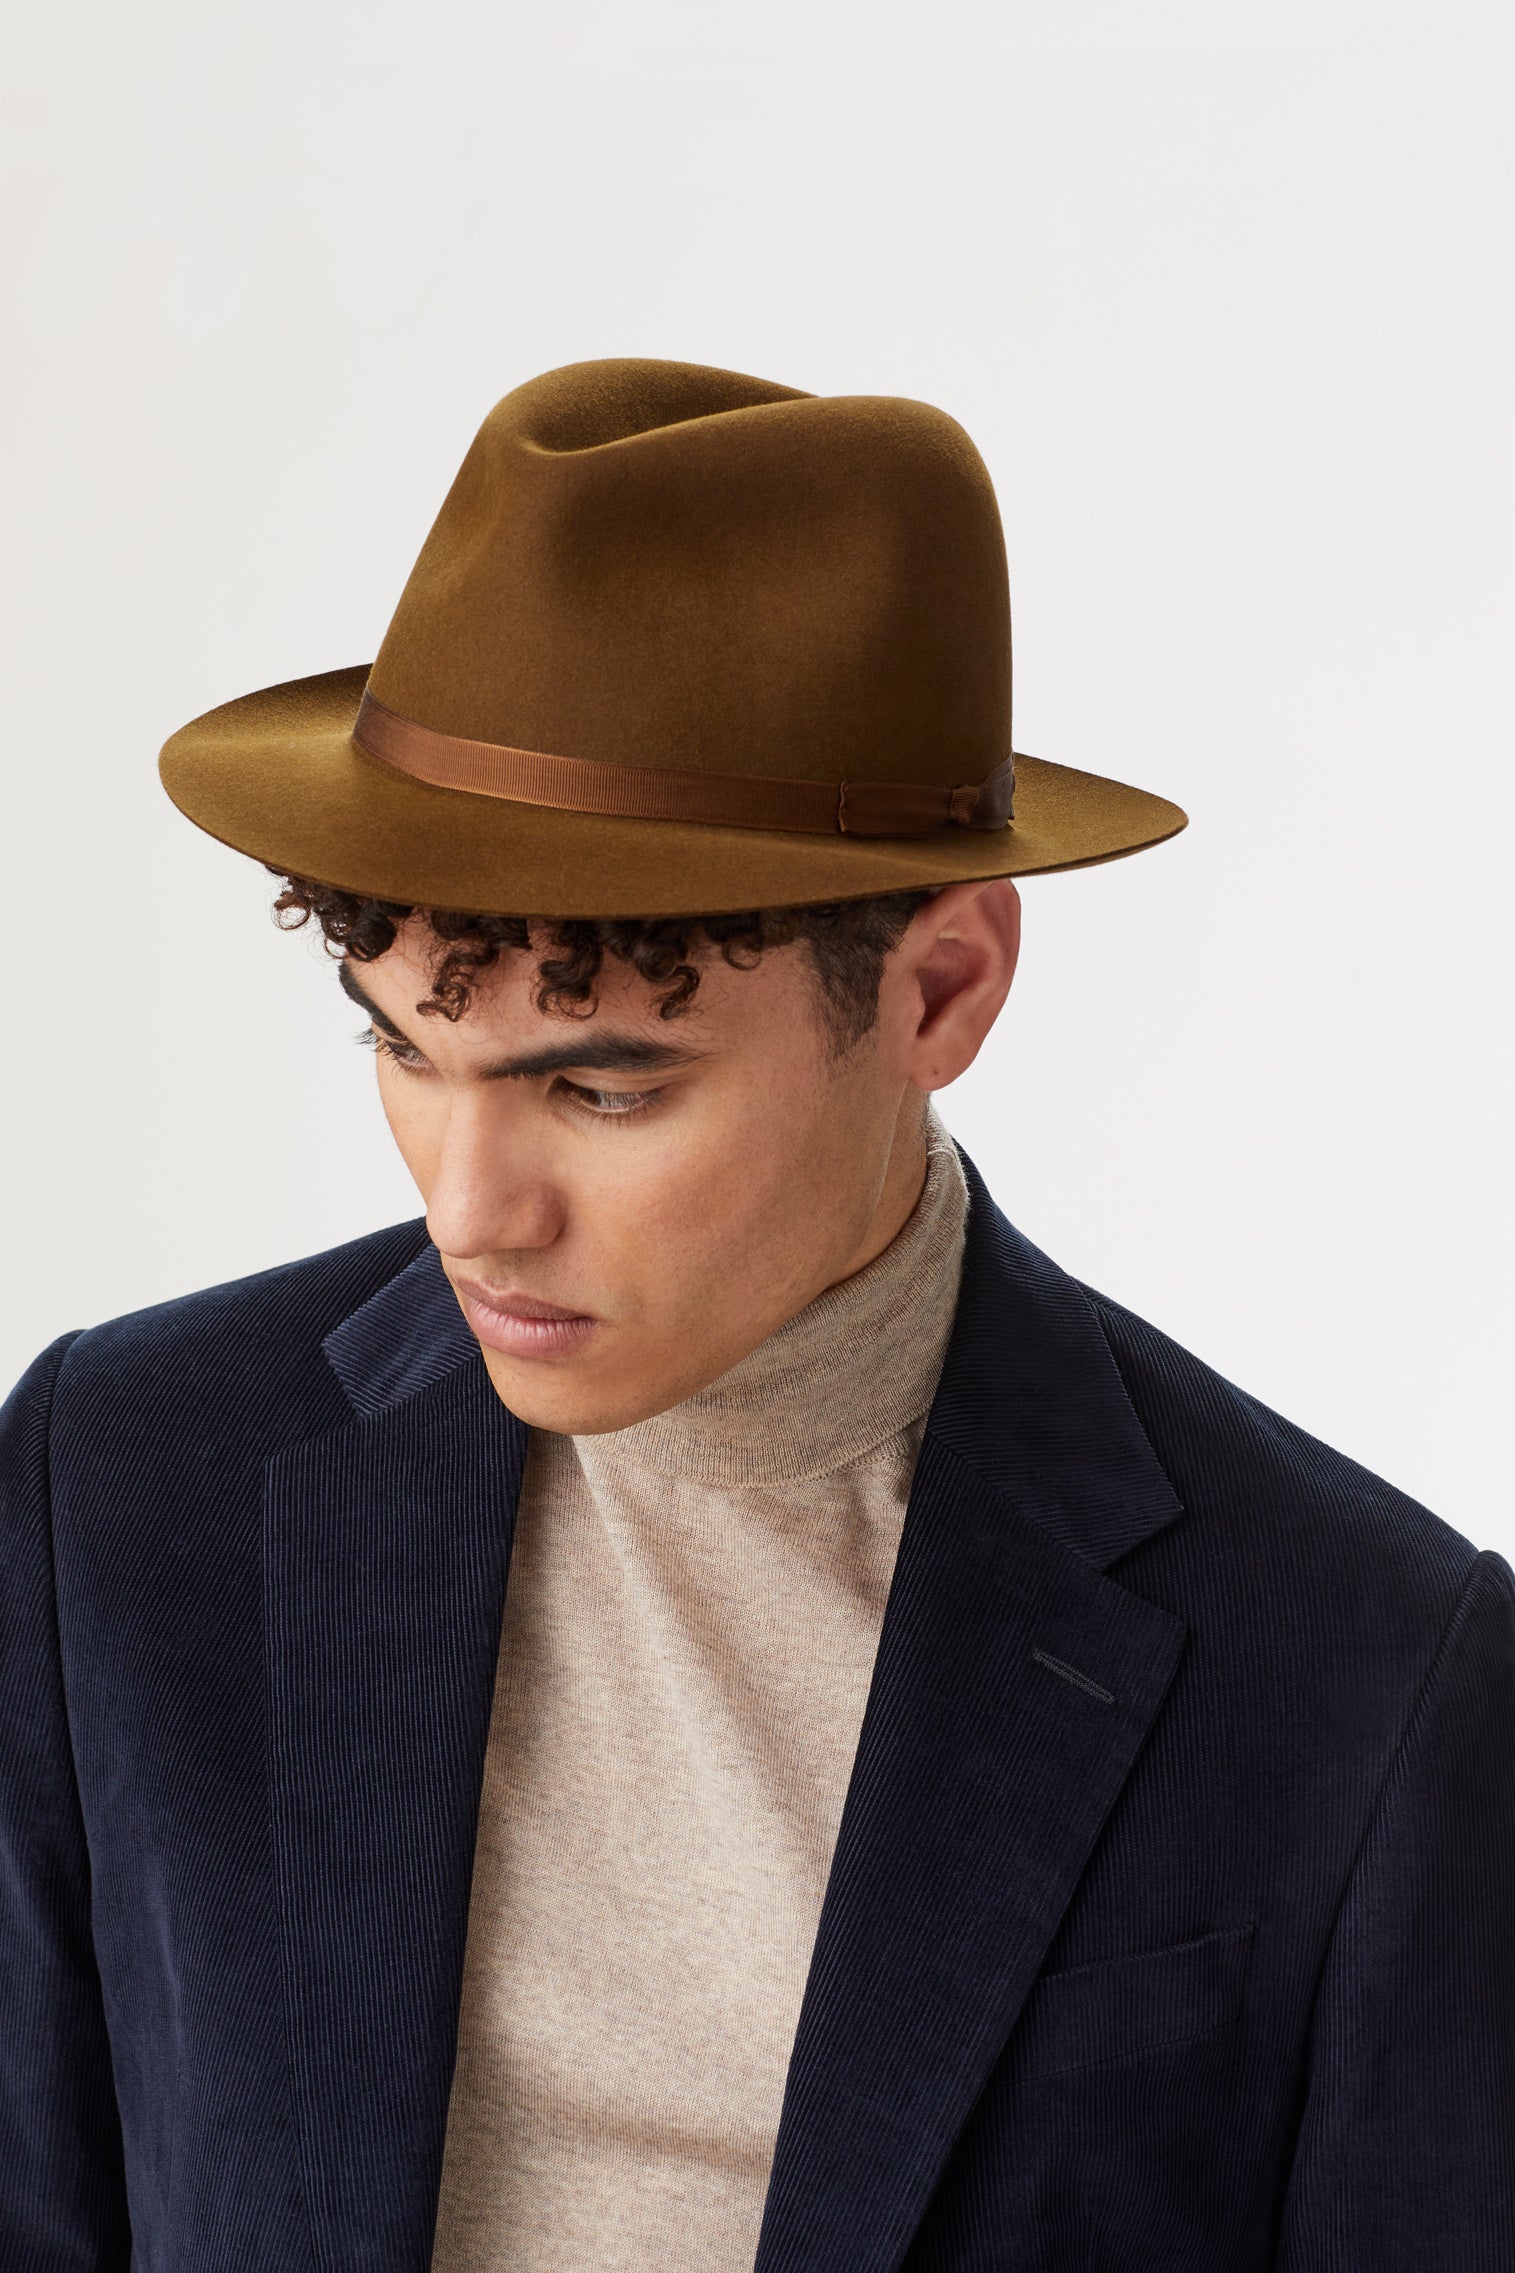 Voyager Rollable Trilby - All Ready to Wear - Lock & Co. Hatters London UK